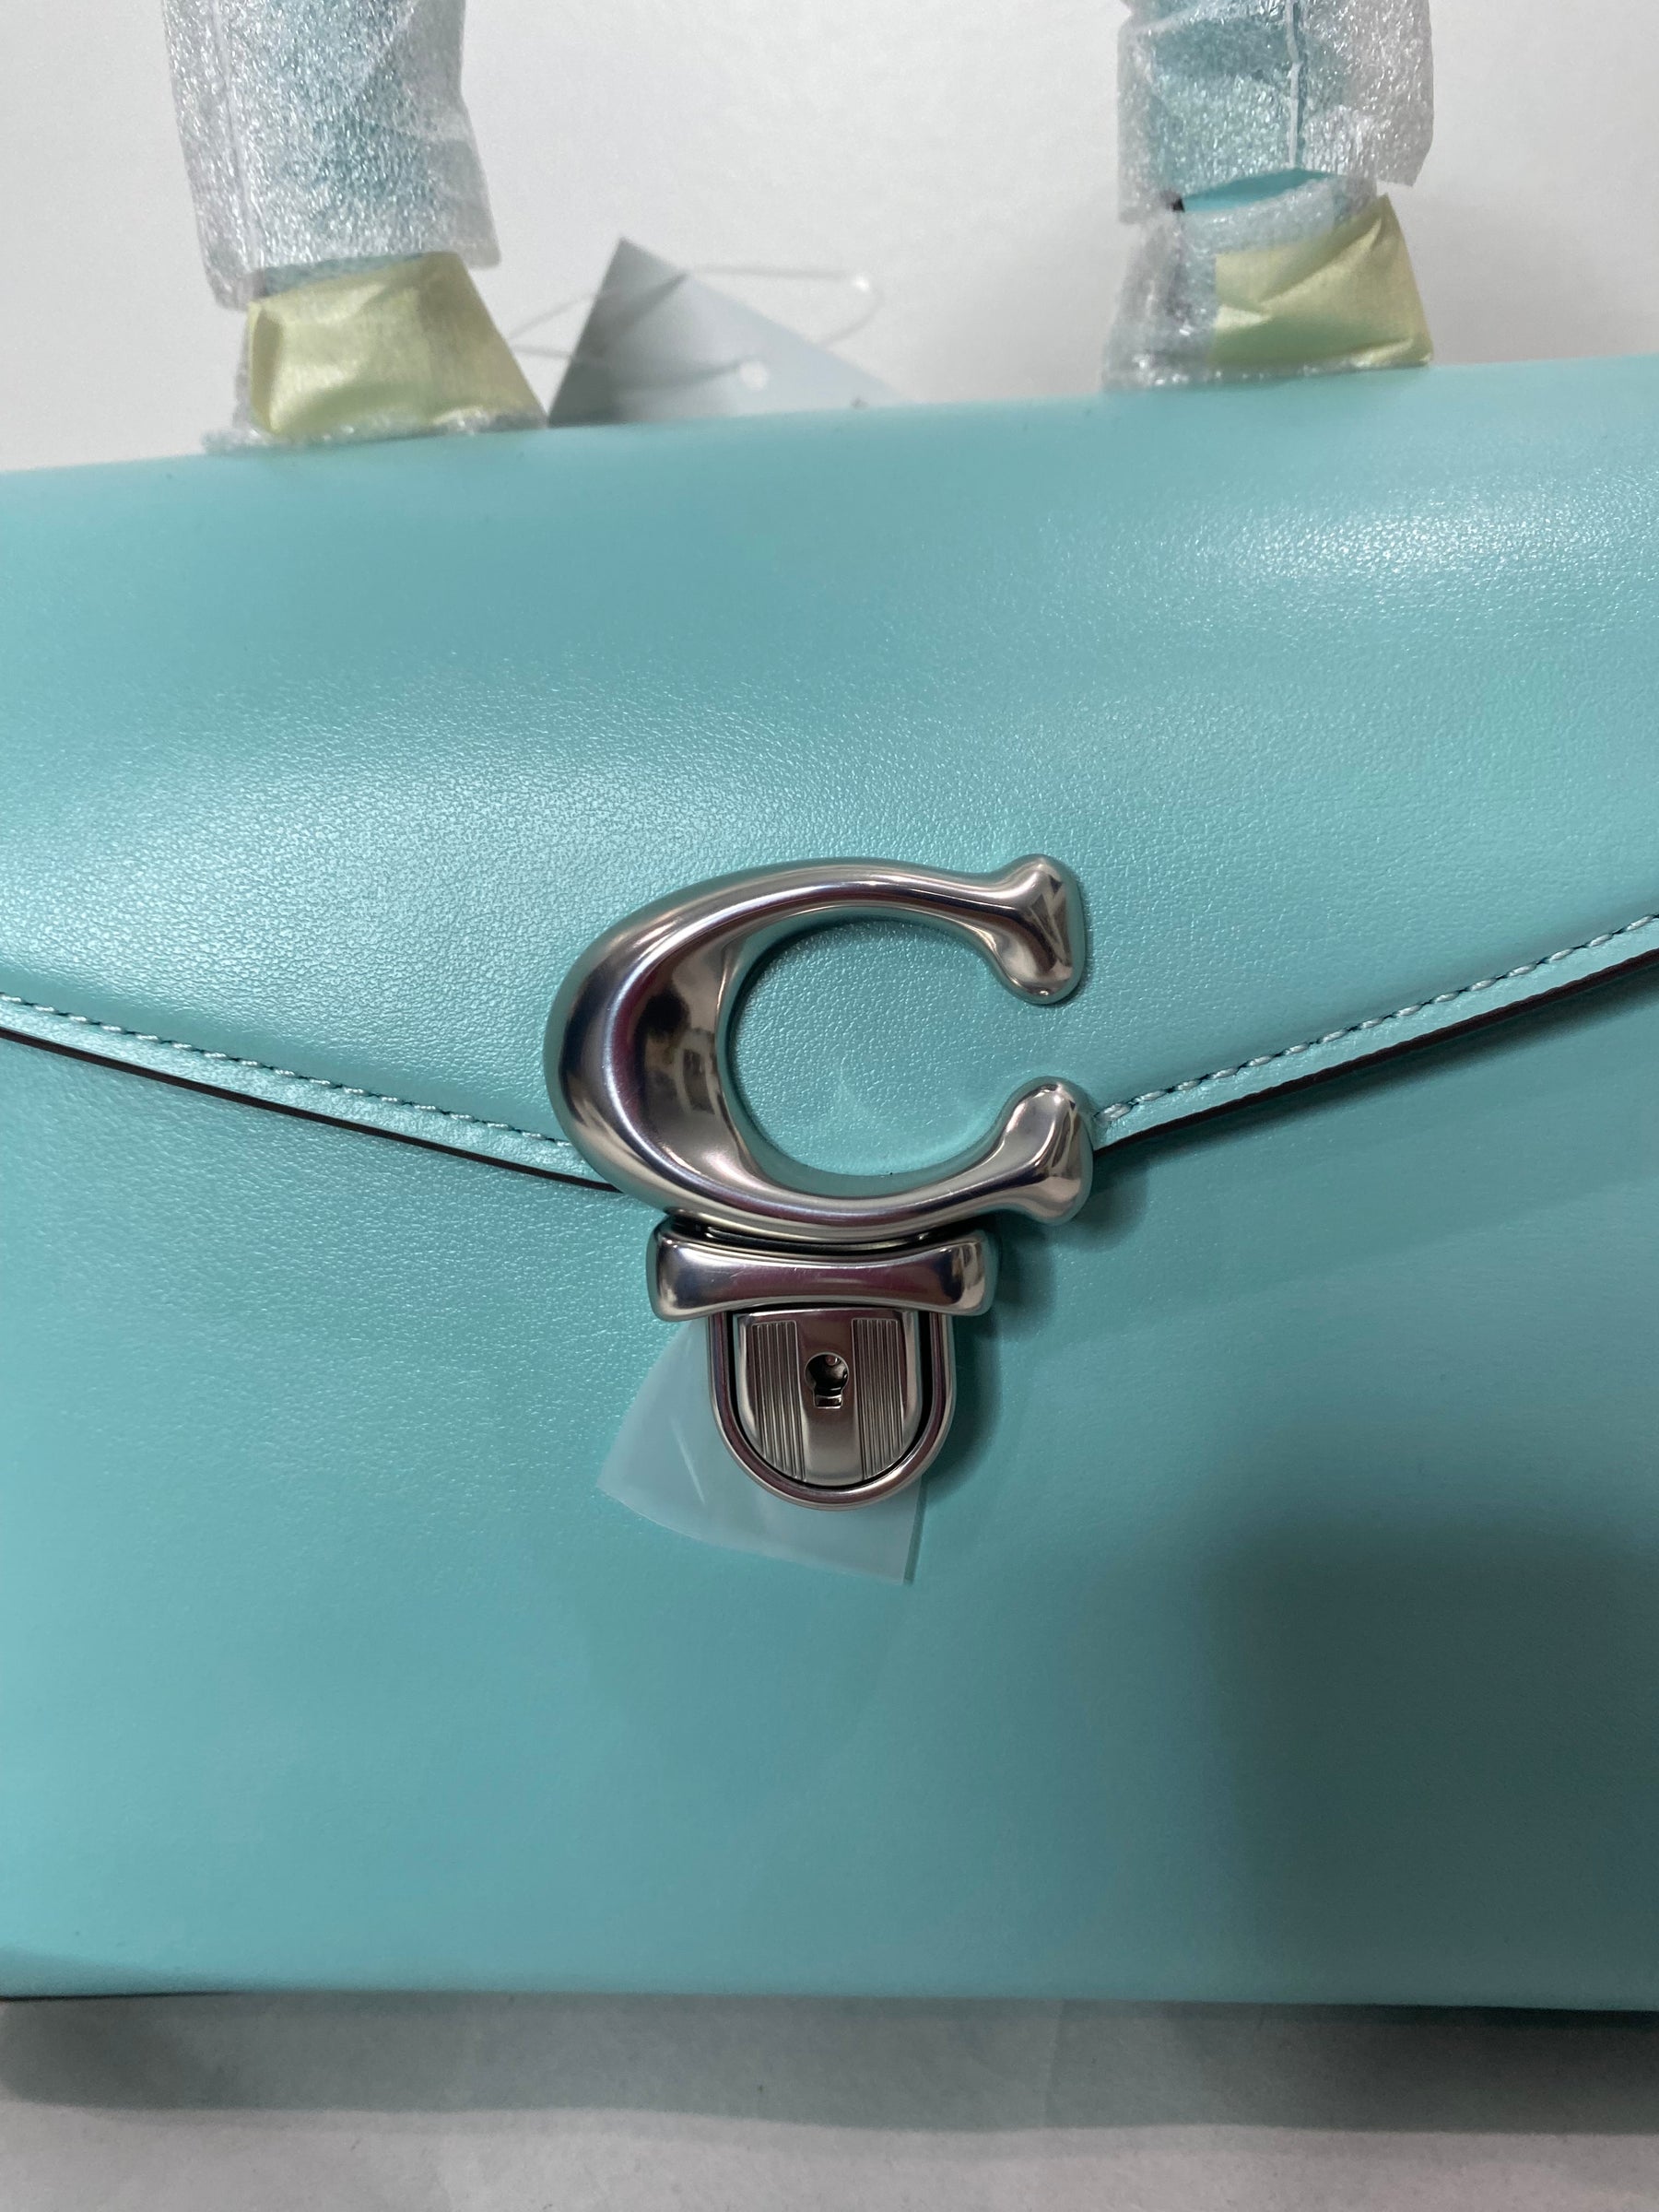 Coach Luxe Refined Calf Leather Top Handle Bag | Versatile Elegance with Gleaming Hardware